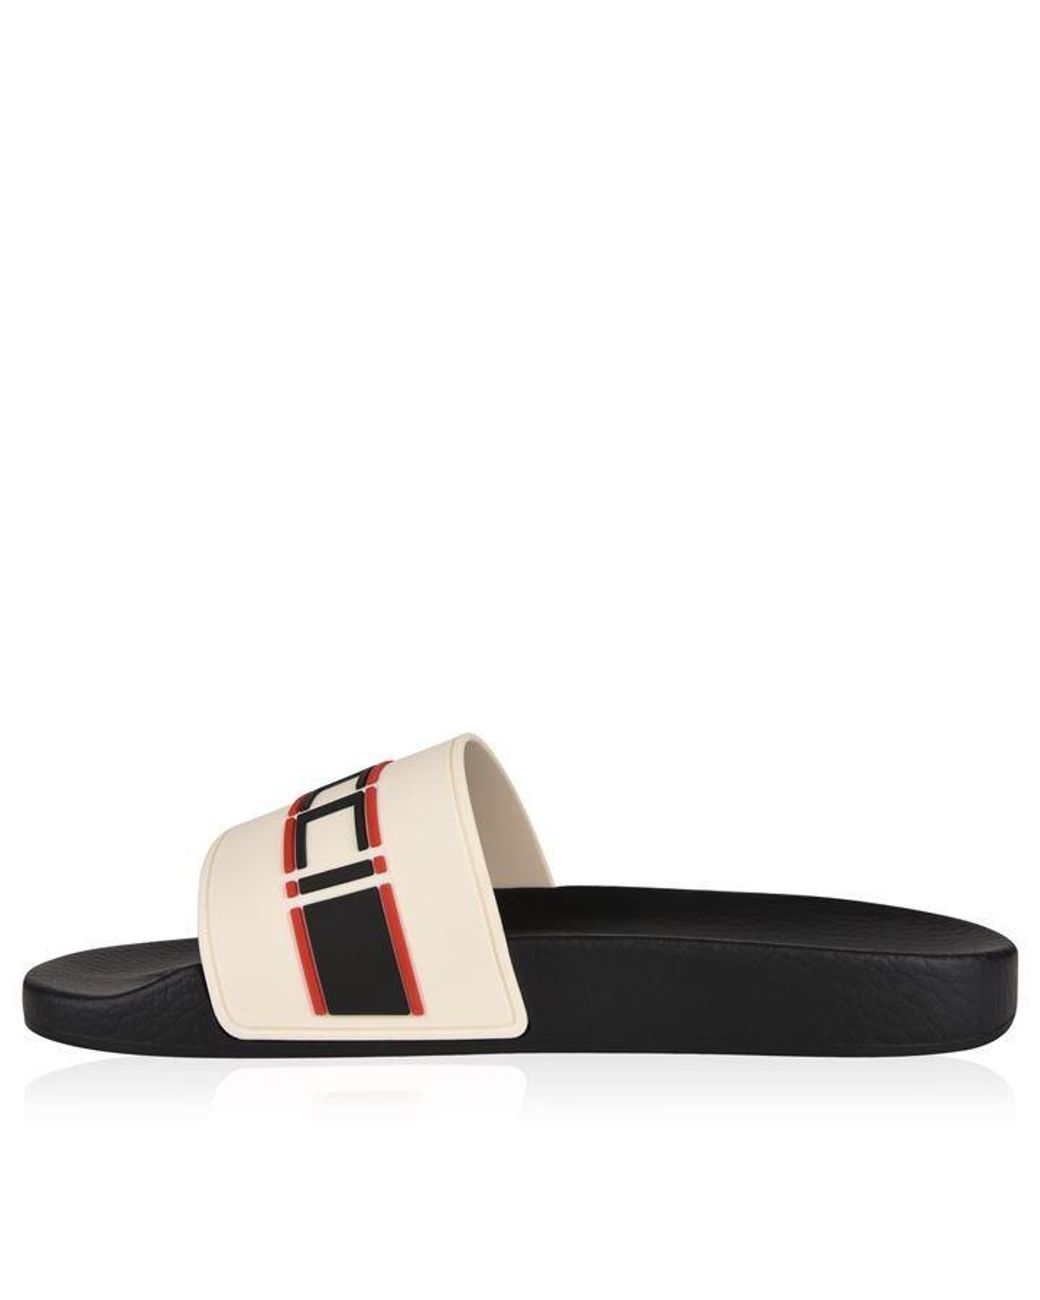 flannels gucci sliders cheap online